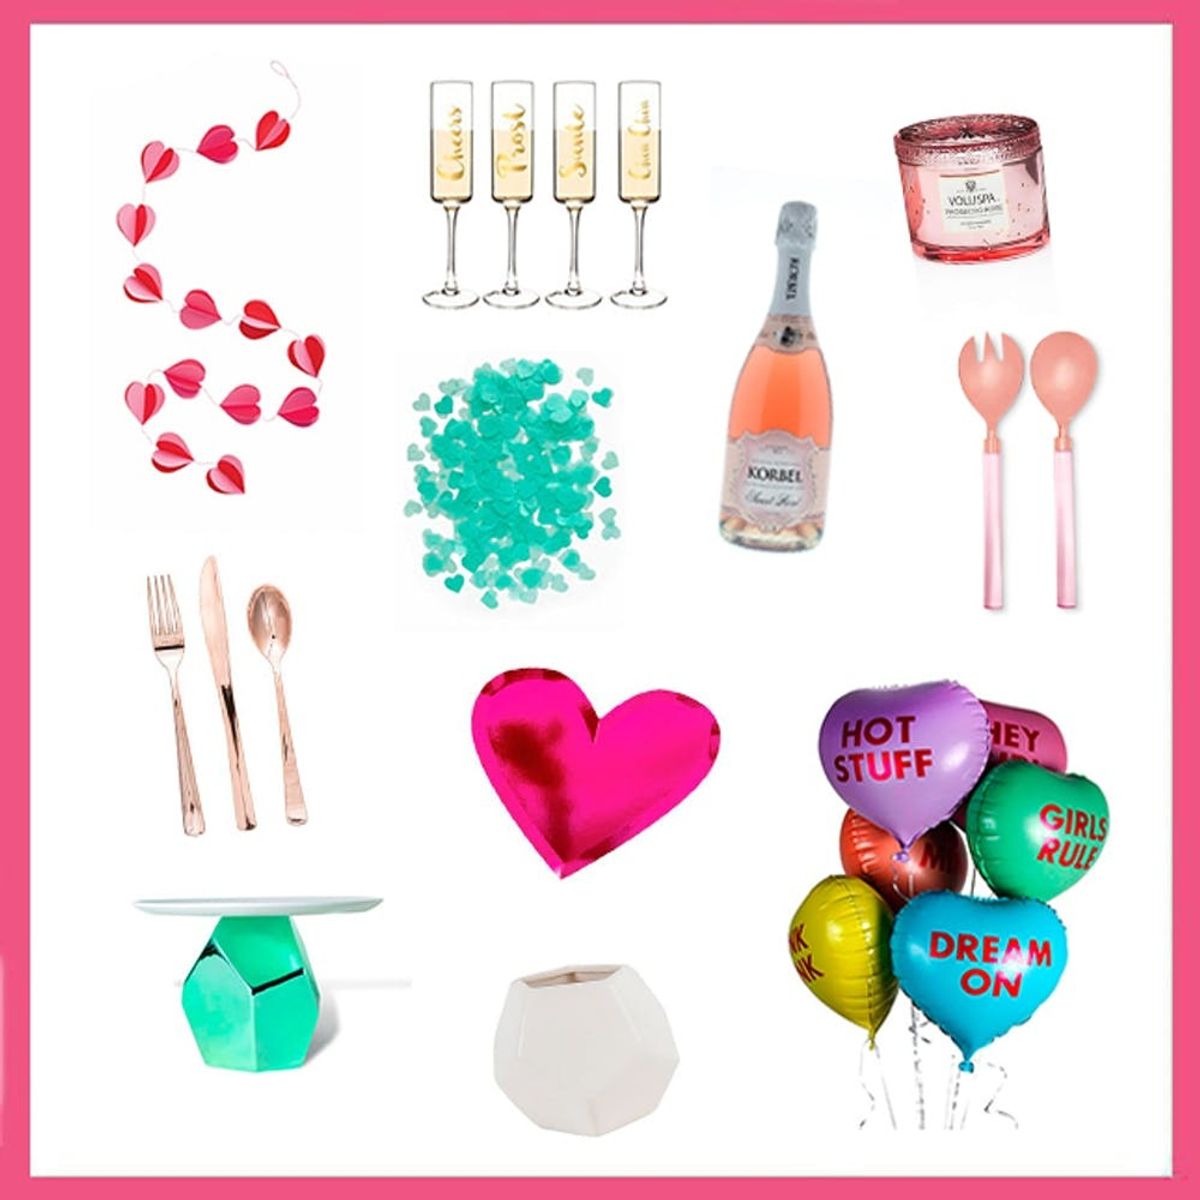 3 Totally Fab Party Themes to Celebrate Your #Squad This Galentine’s Day